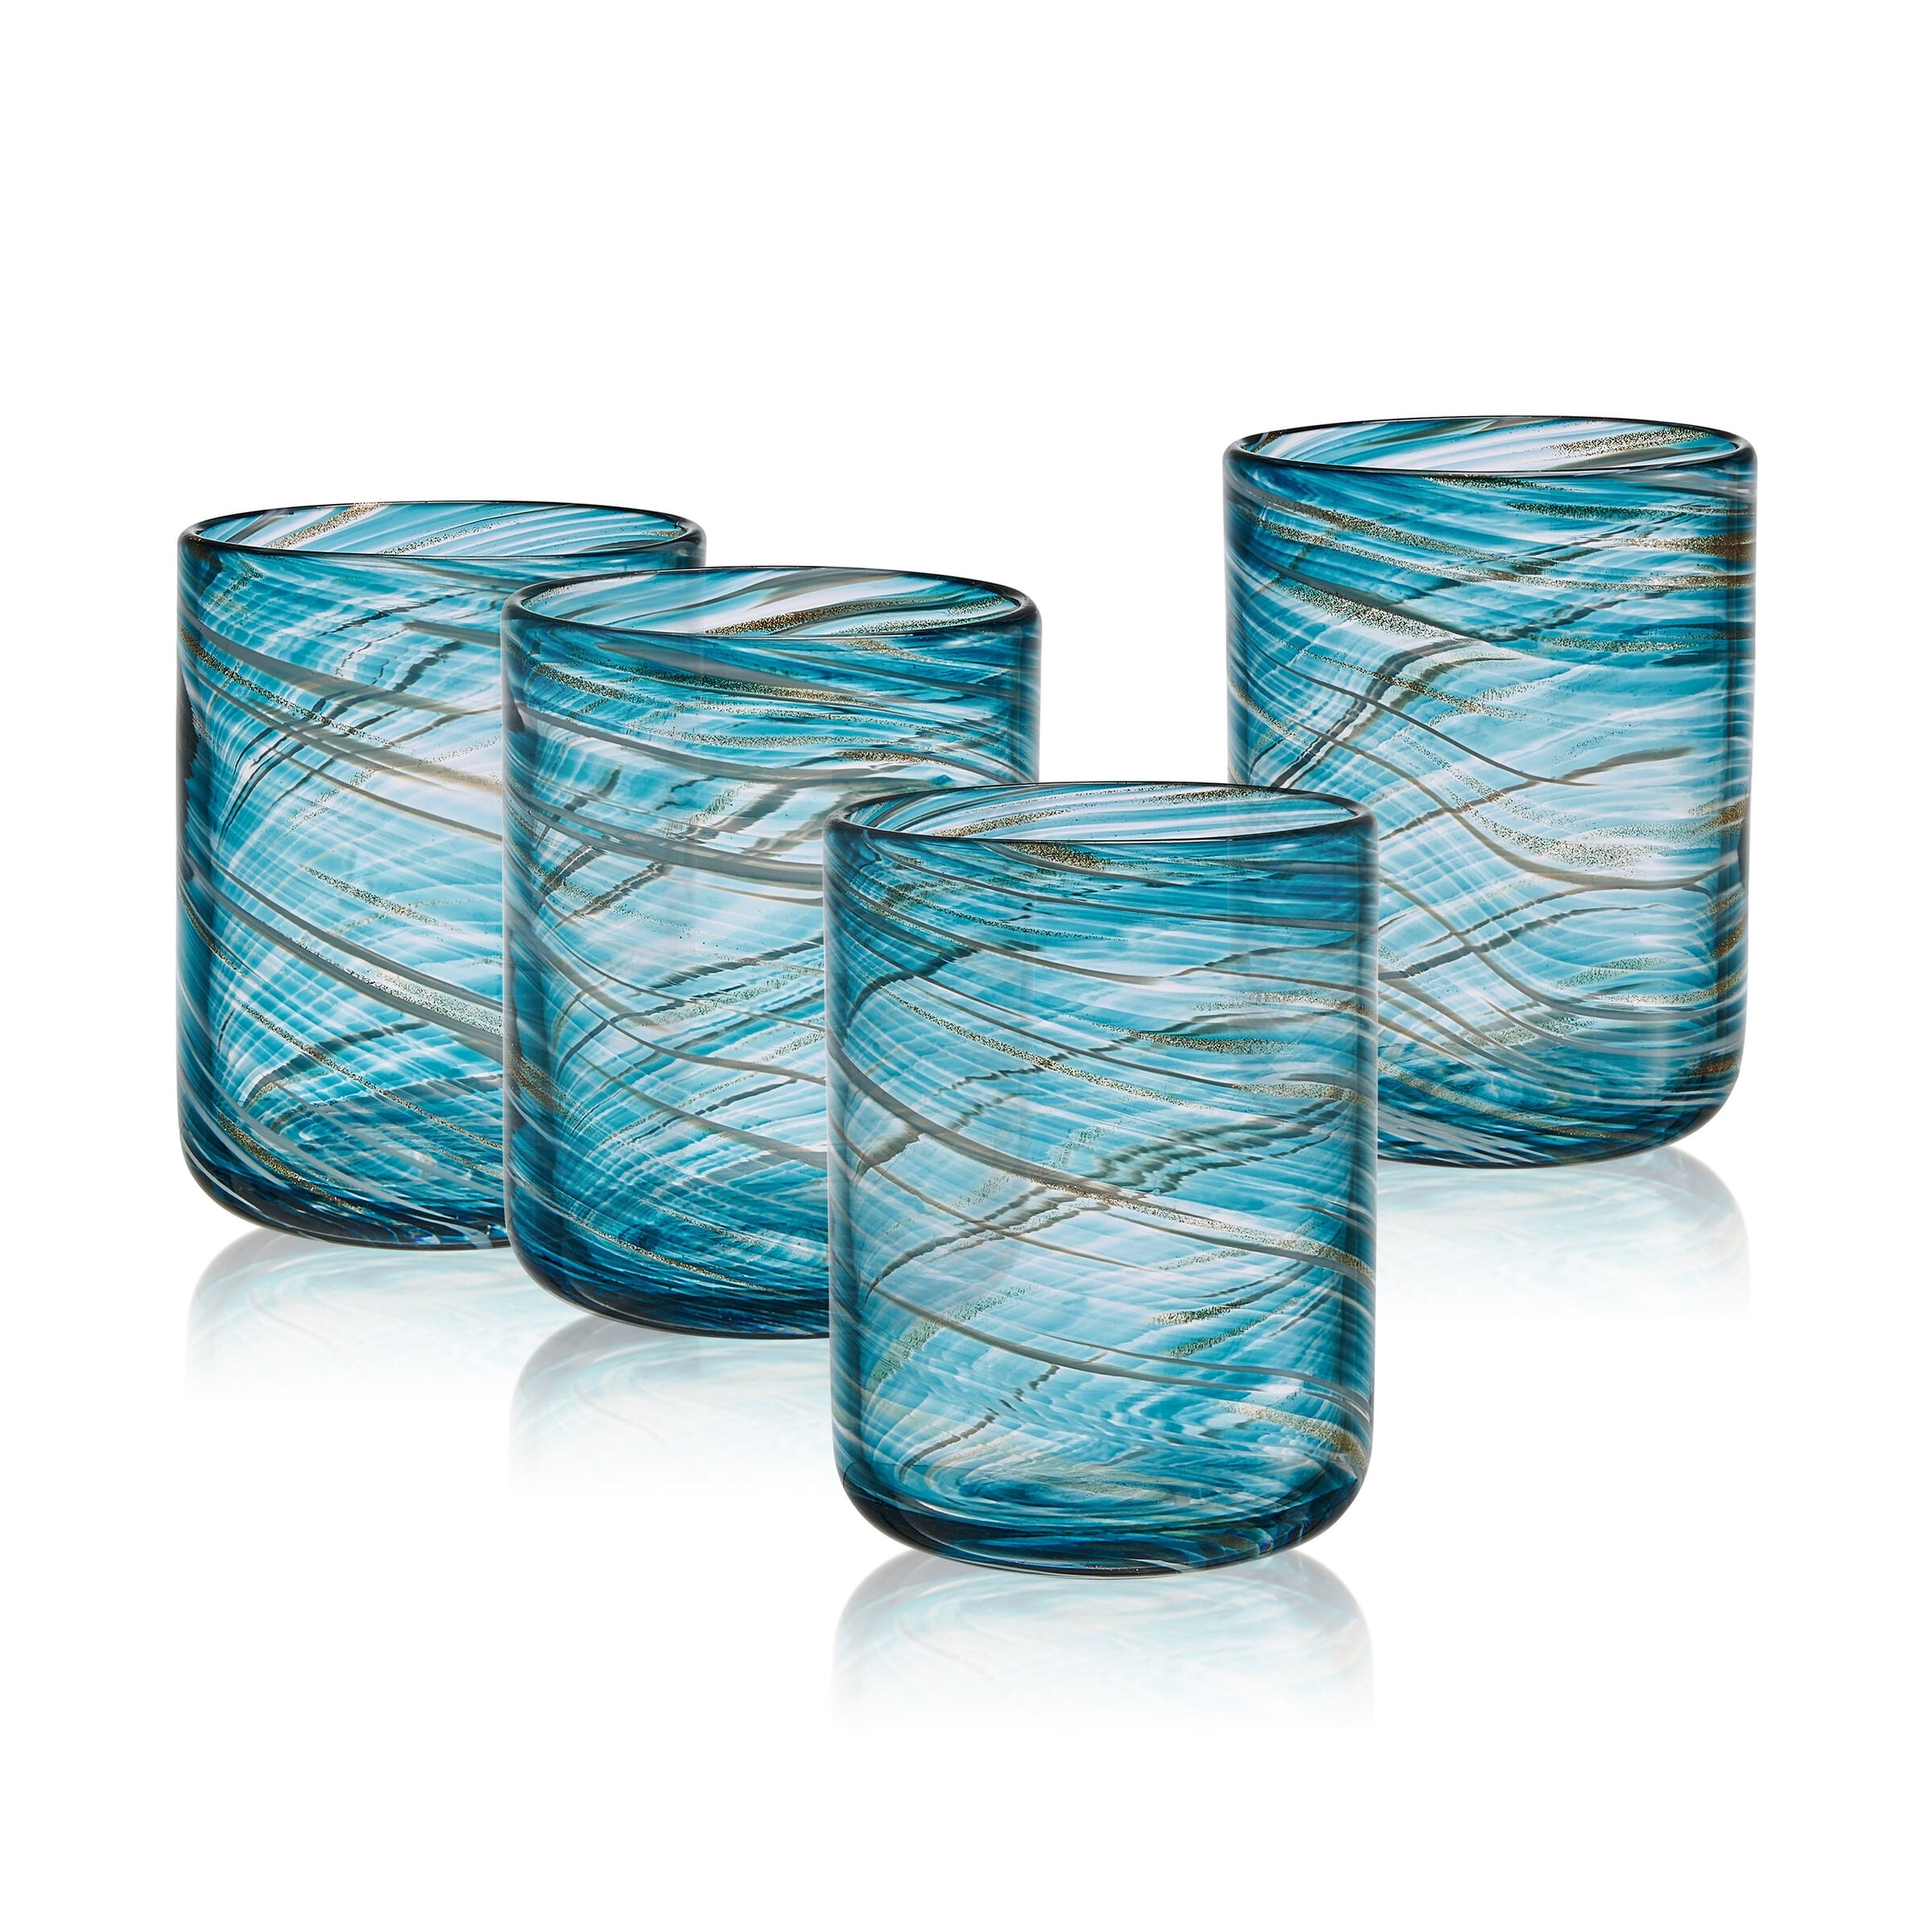 https://ak1.ostkcdn.com/images/products/is/images/direct/17b29e8e261116e00bf6f7fb44d97b98ce385725/Mikasa-Color-Swirl-Double-Old-Fashioned-Glass%2C-Set-of-4.jpg